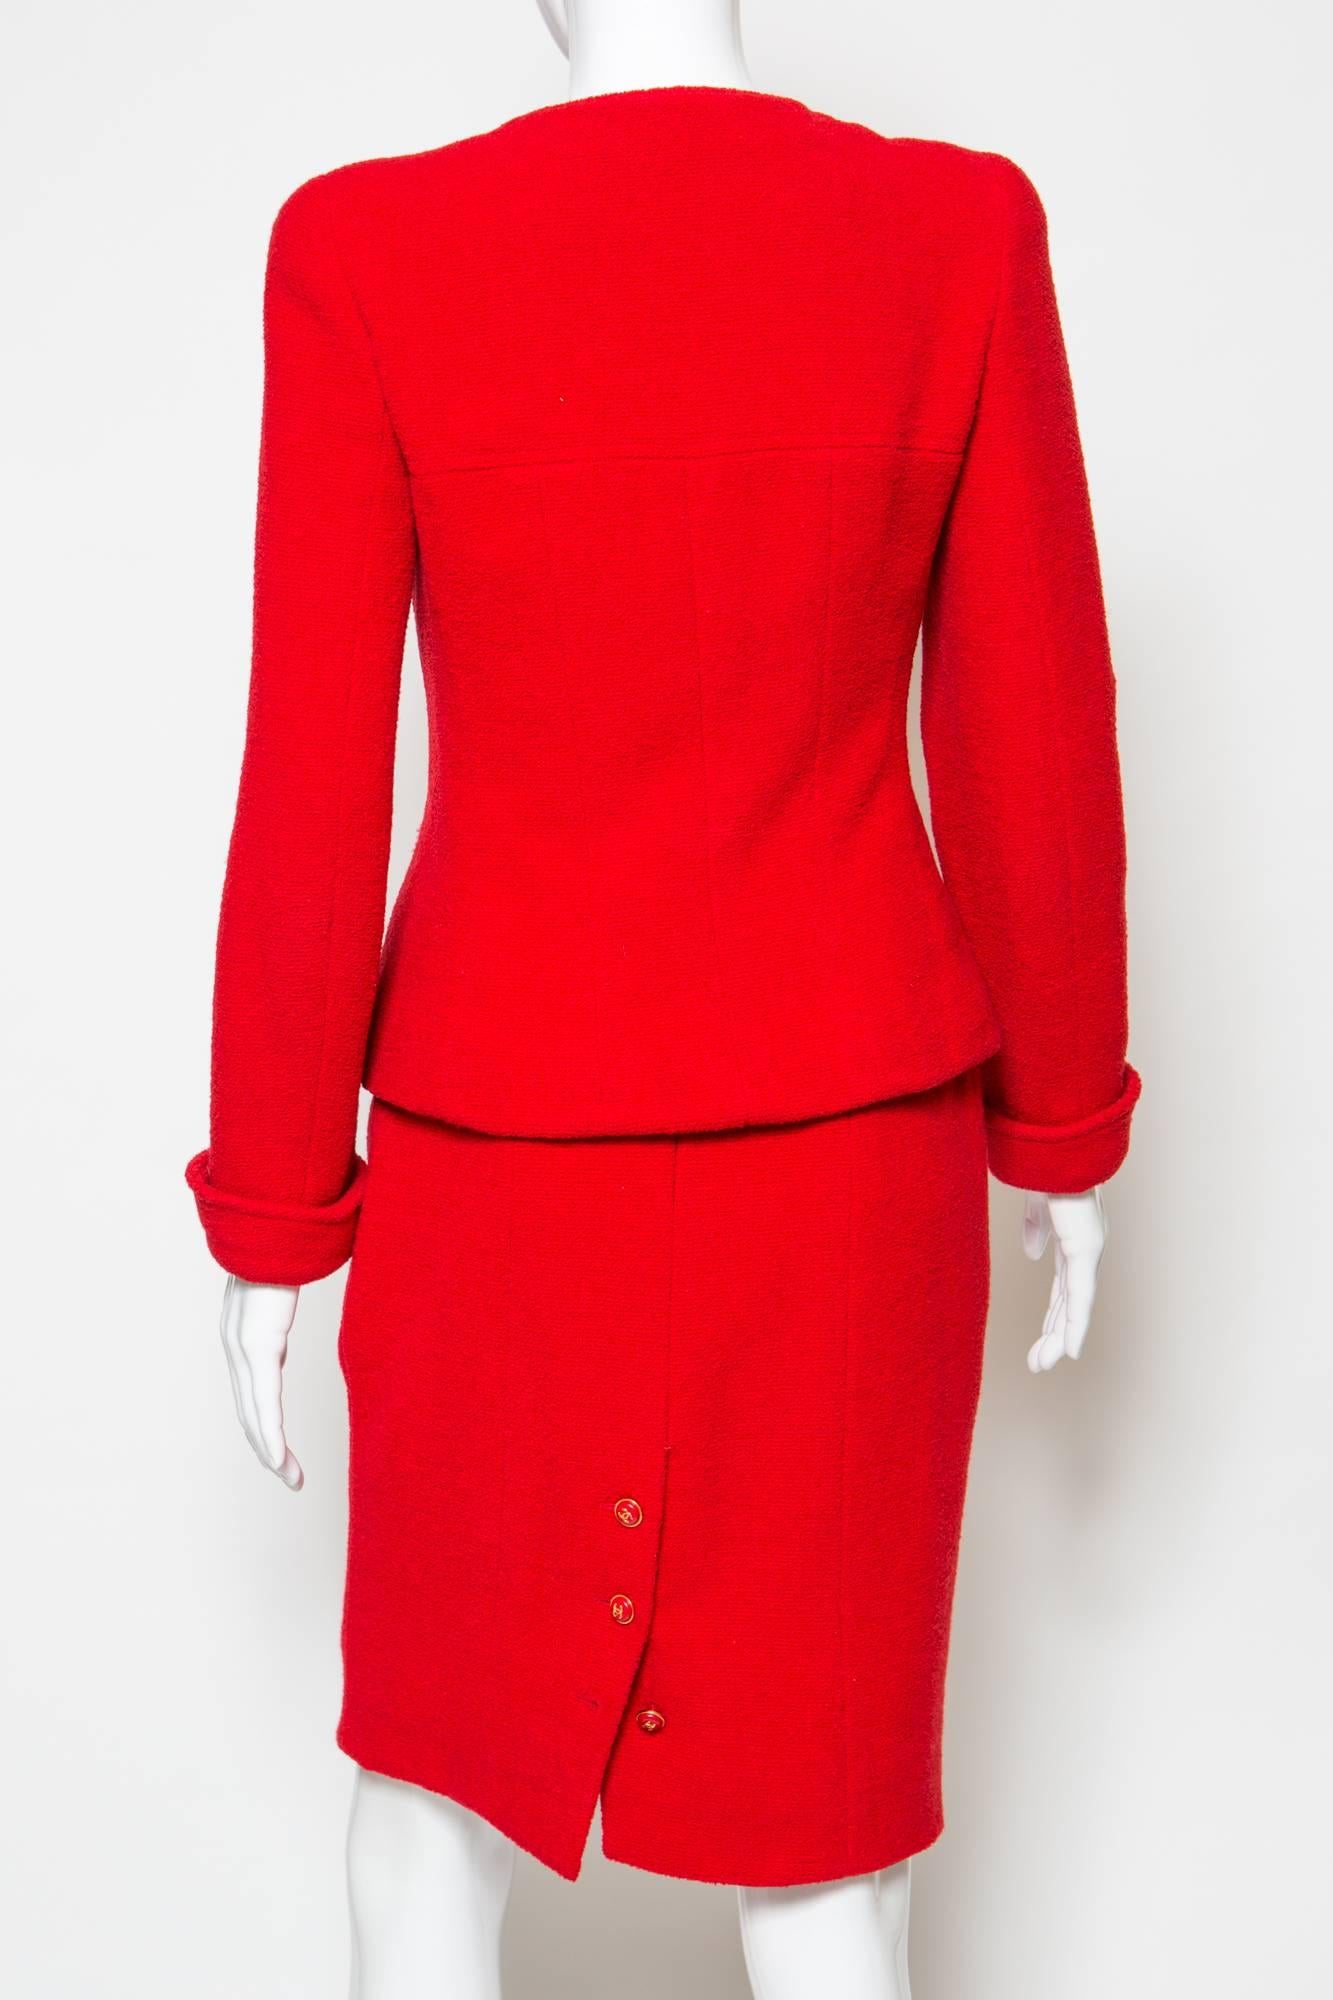 Women's 1990s Chanel Iconic Red Boucle Skirt Suit